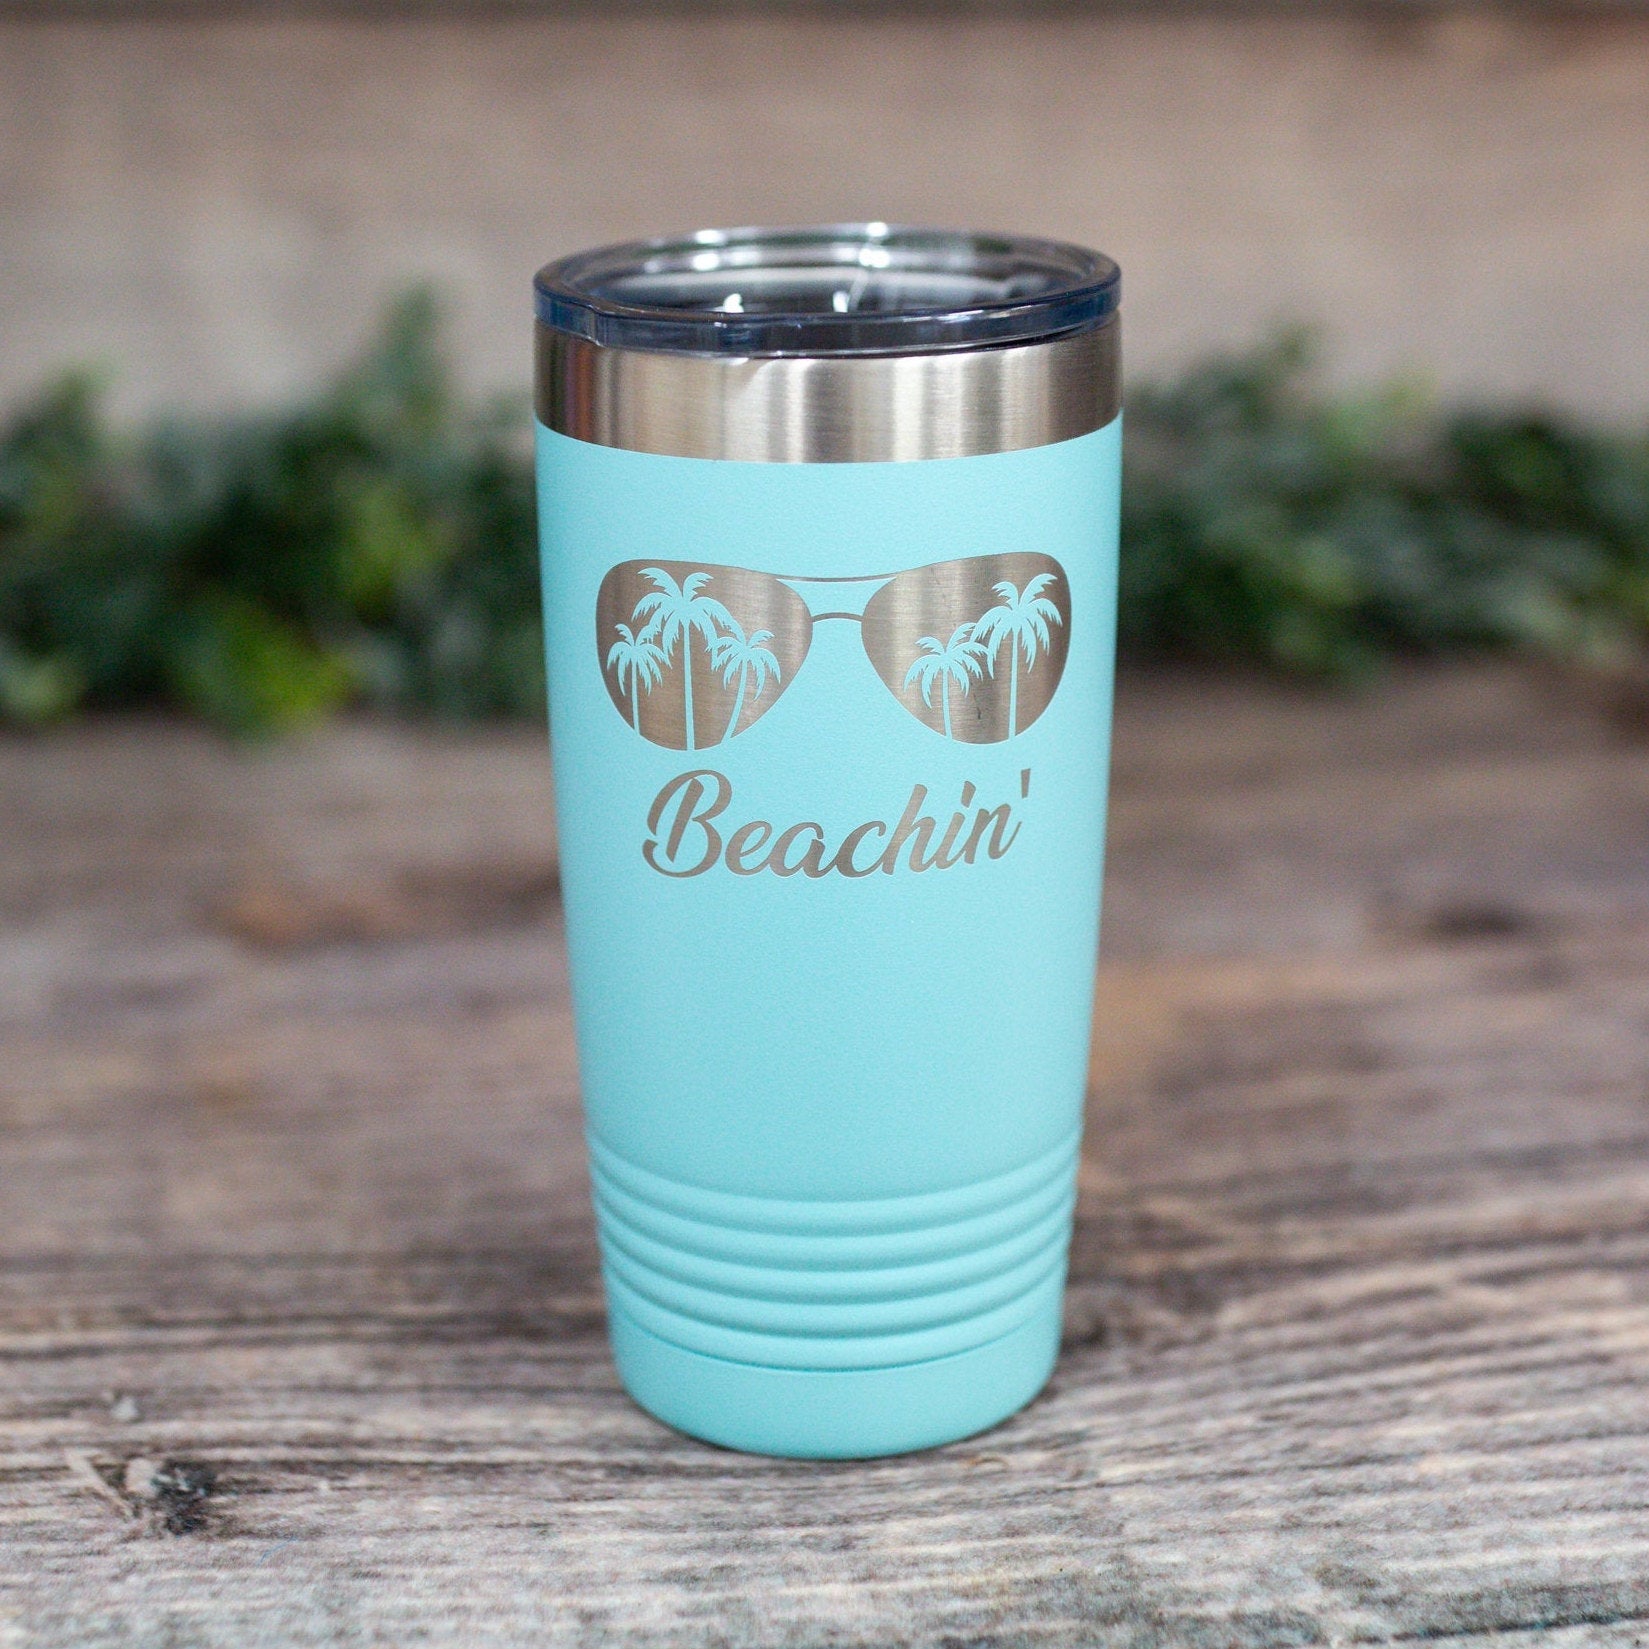 https://3cetching.com/wp-content/uploads/2021/07/beachin-engraved-vacation-tumbler-summer-vacation-tumbler-summer-gift-for-her-60f74a2f.jpg